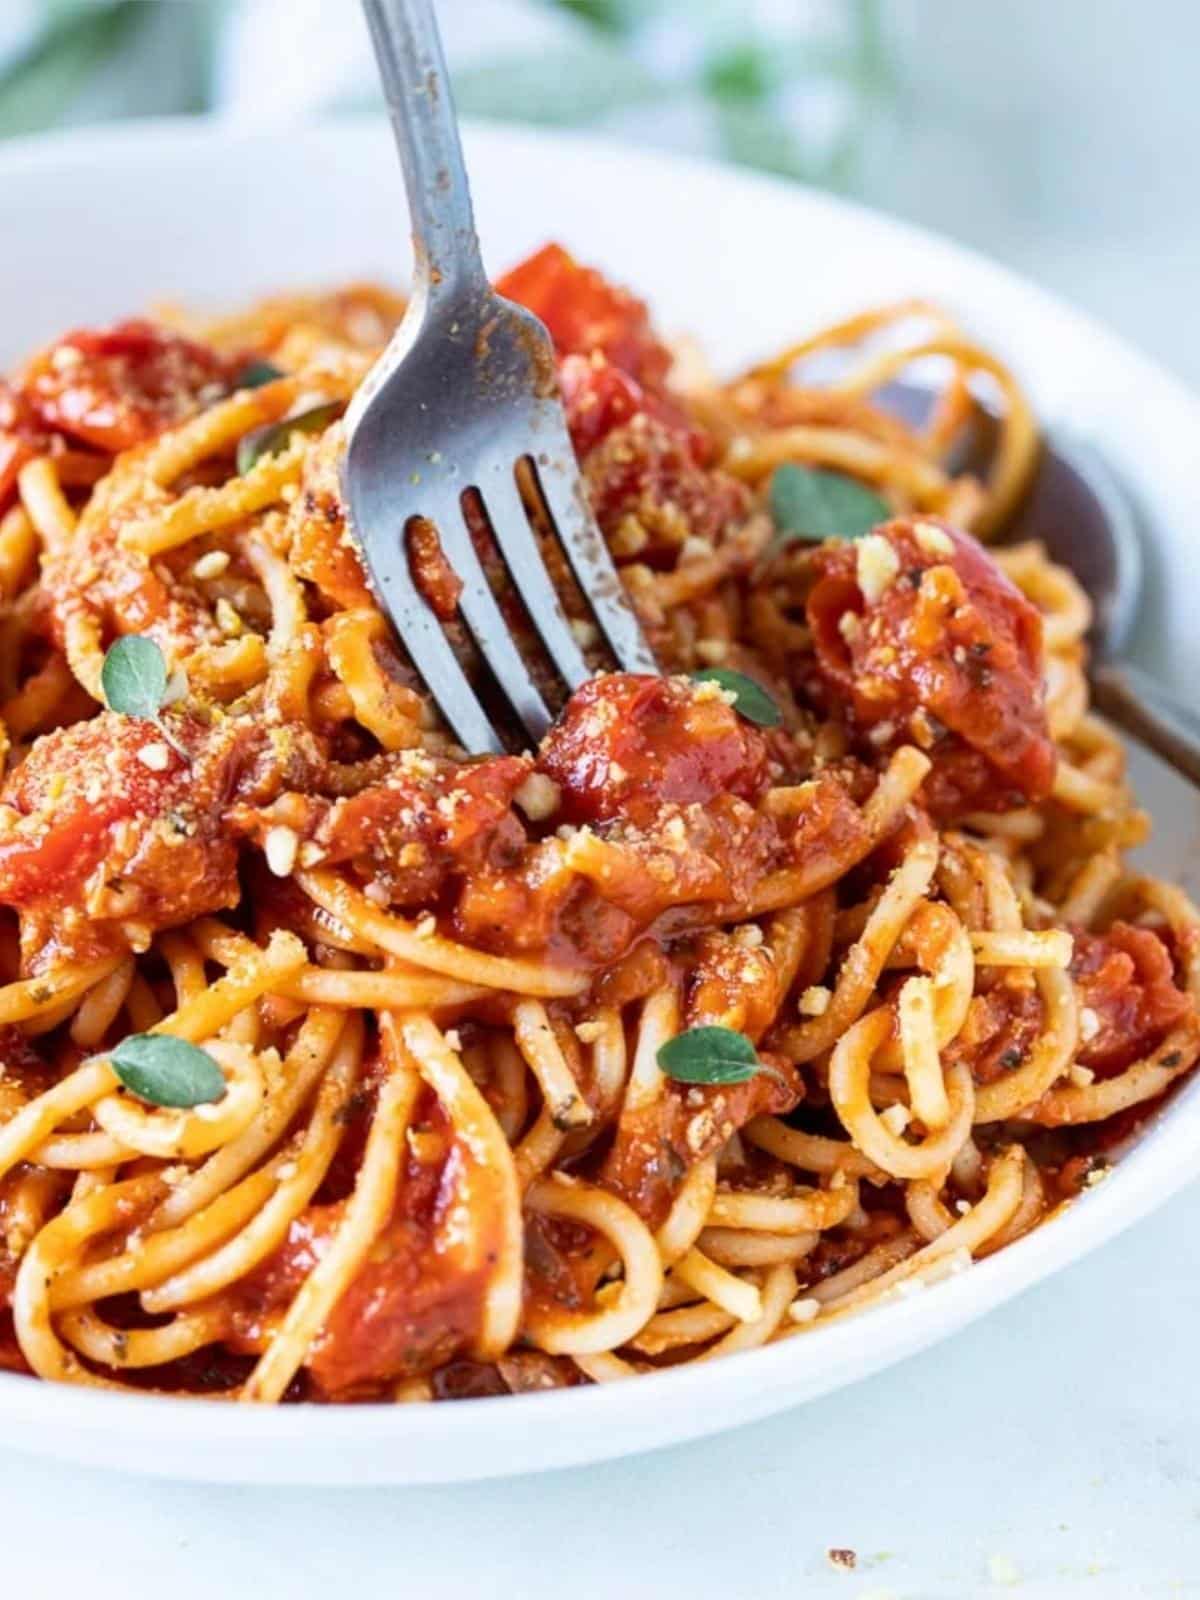 Fork in a bowl of spaghetti with cherry tomato sauce.